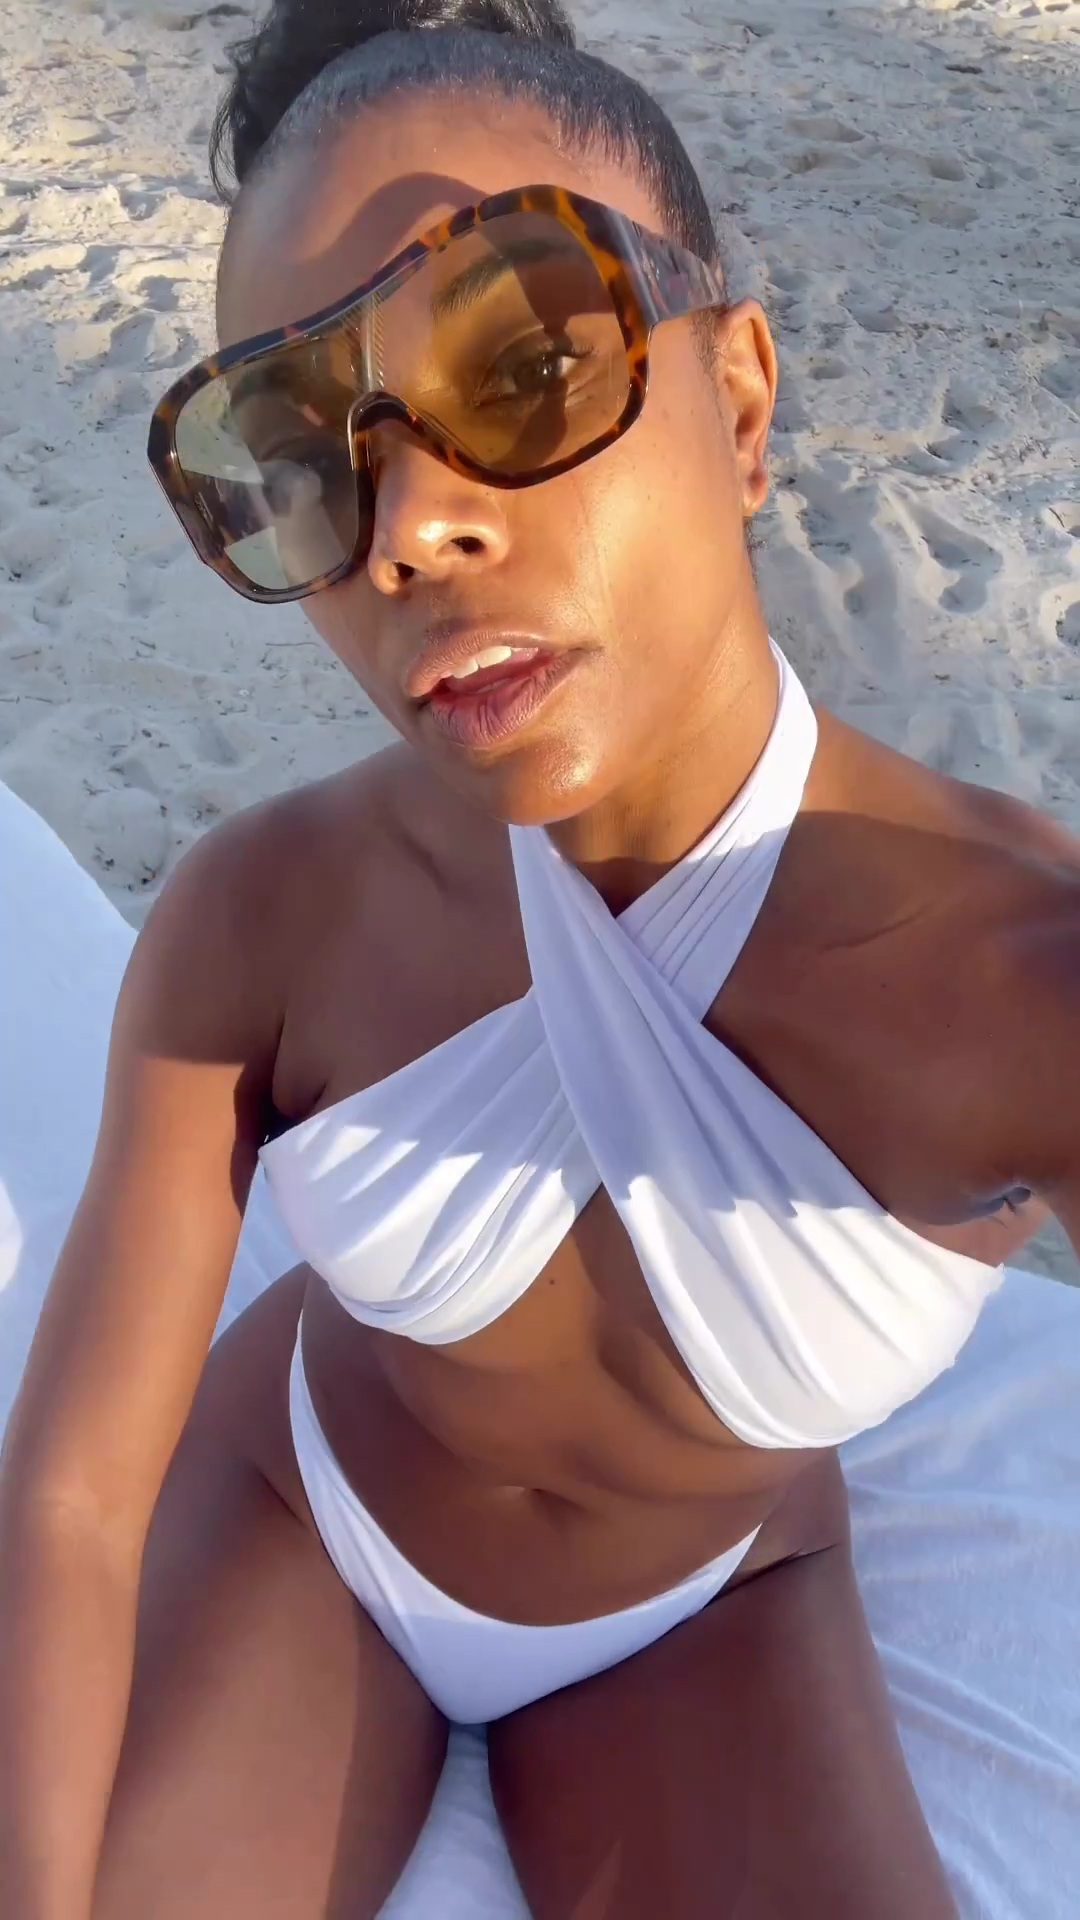 Photos n°1 : Gabrielle Union and Dwyane Wade are On the Beach!